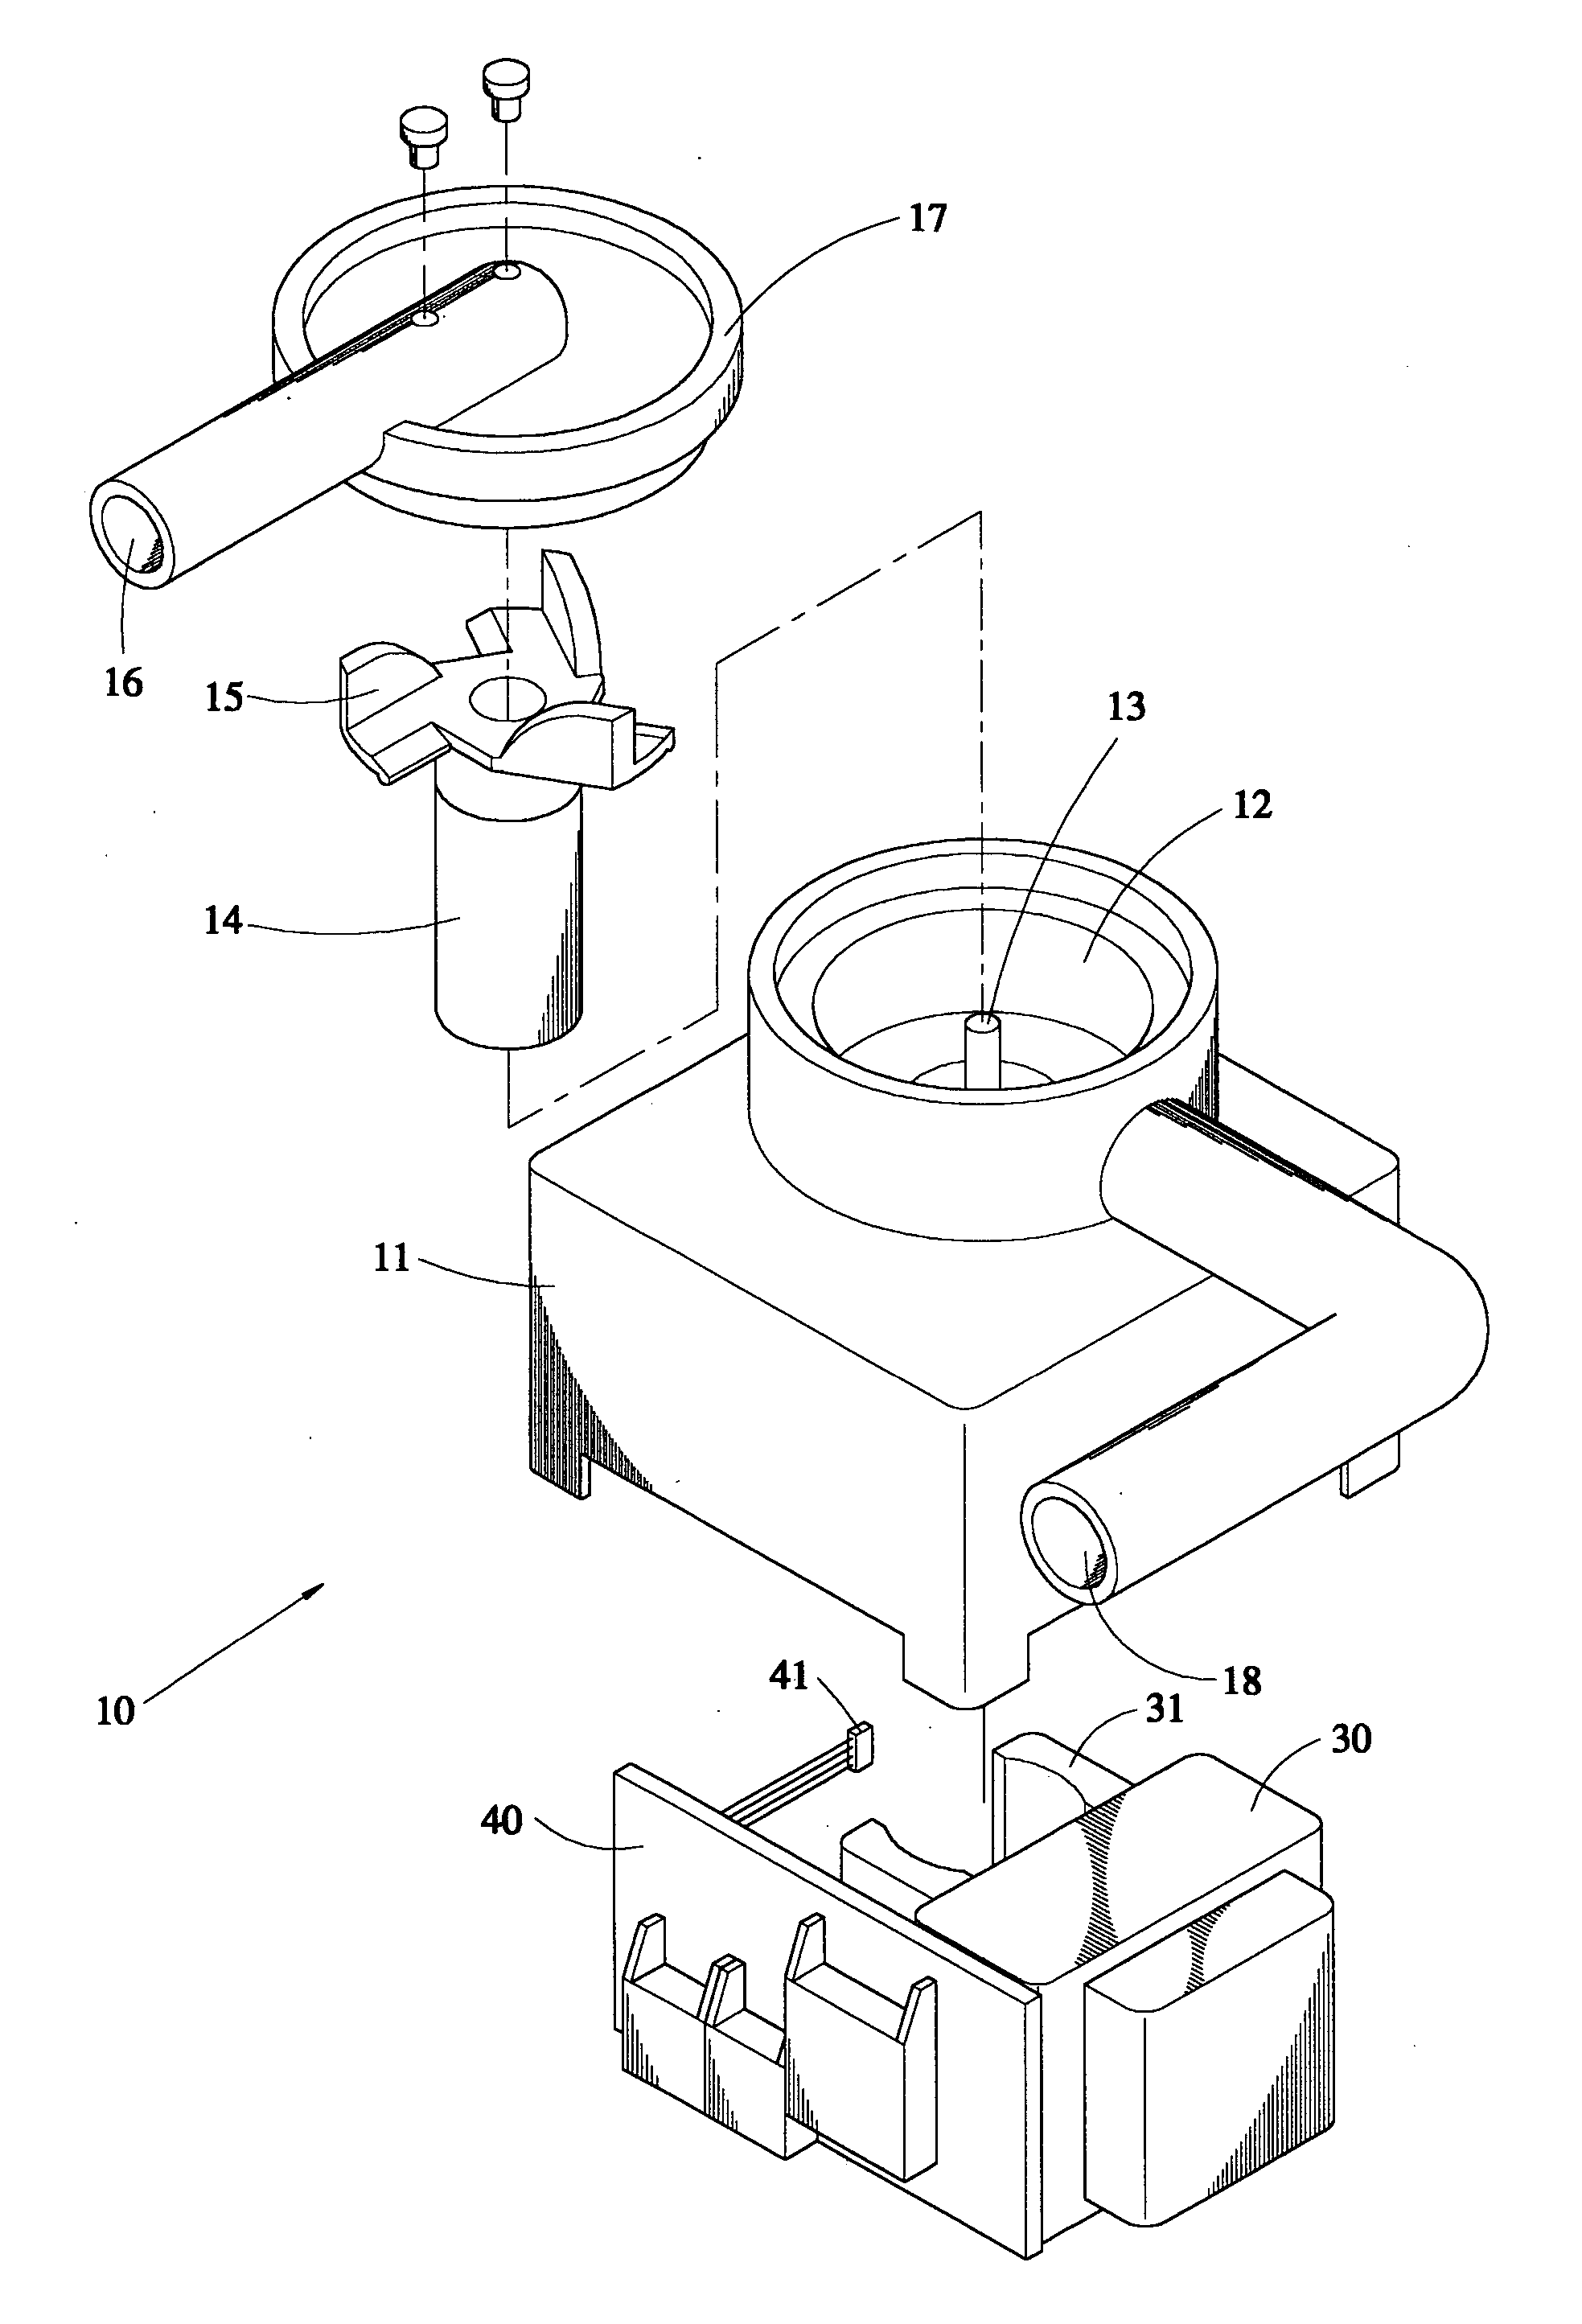 Coolant pumping device